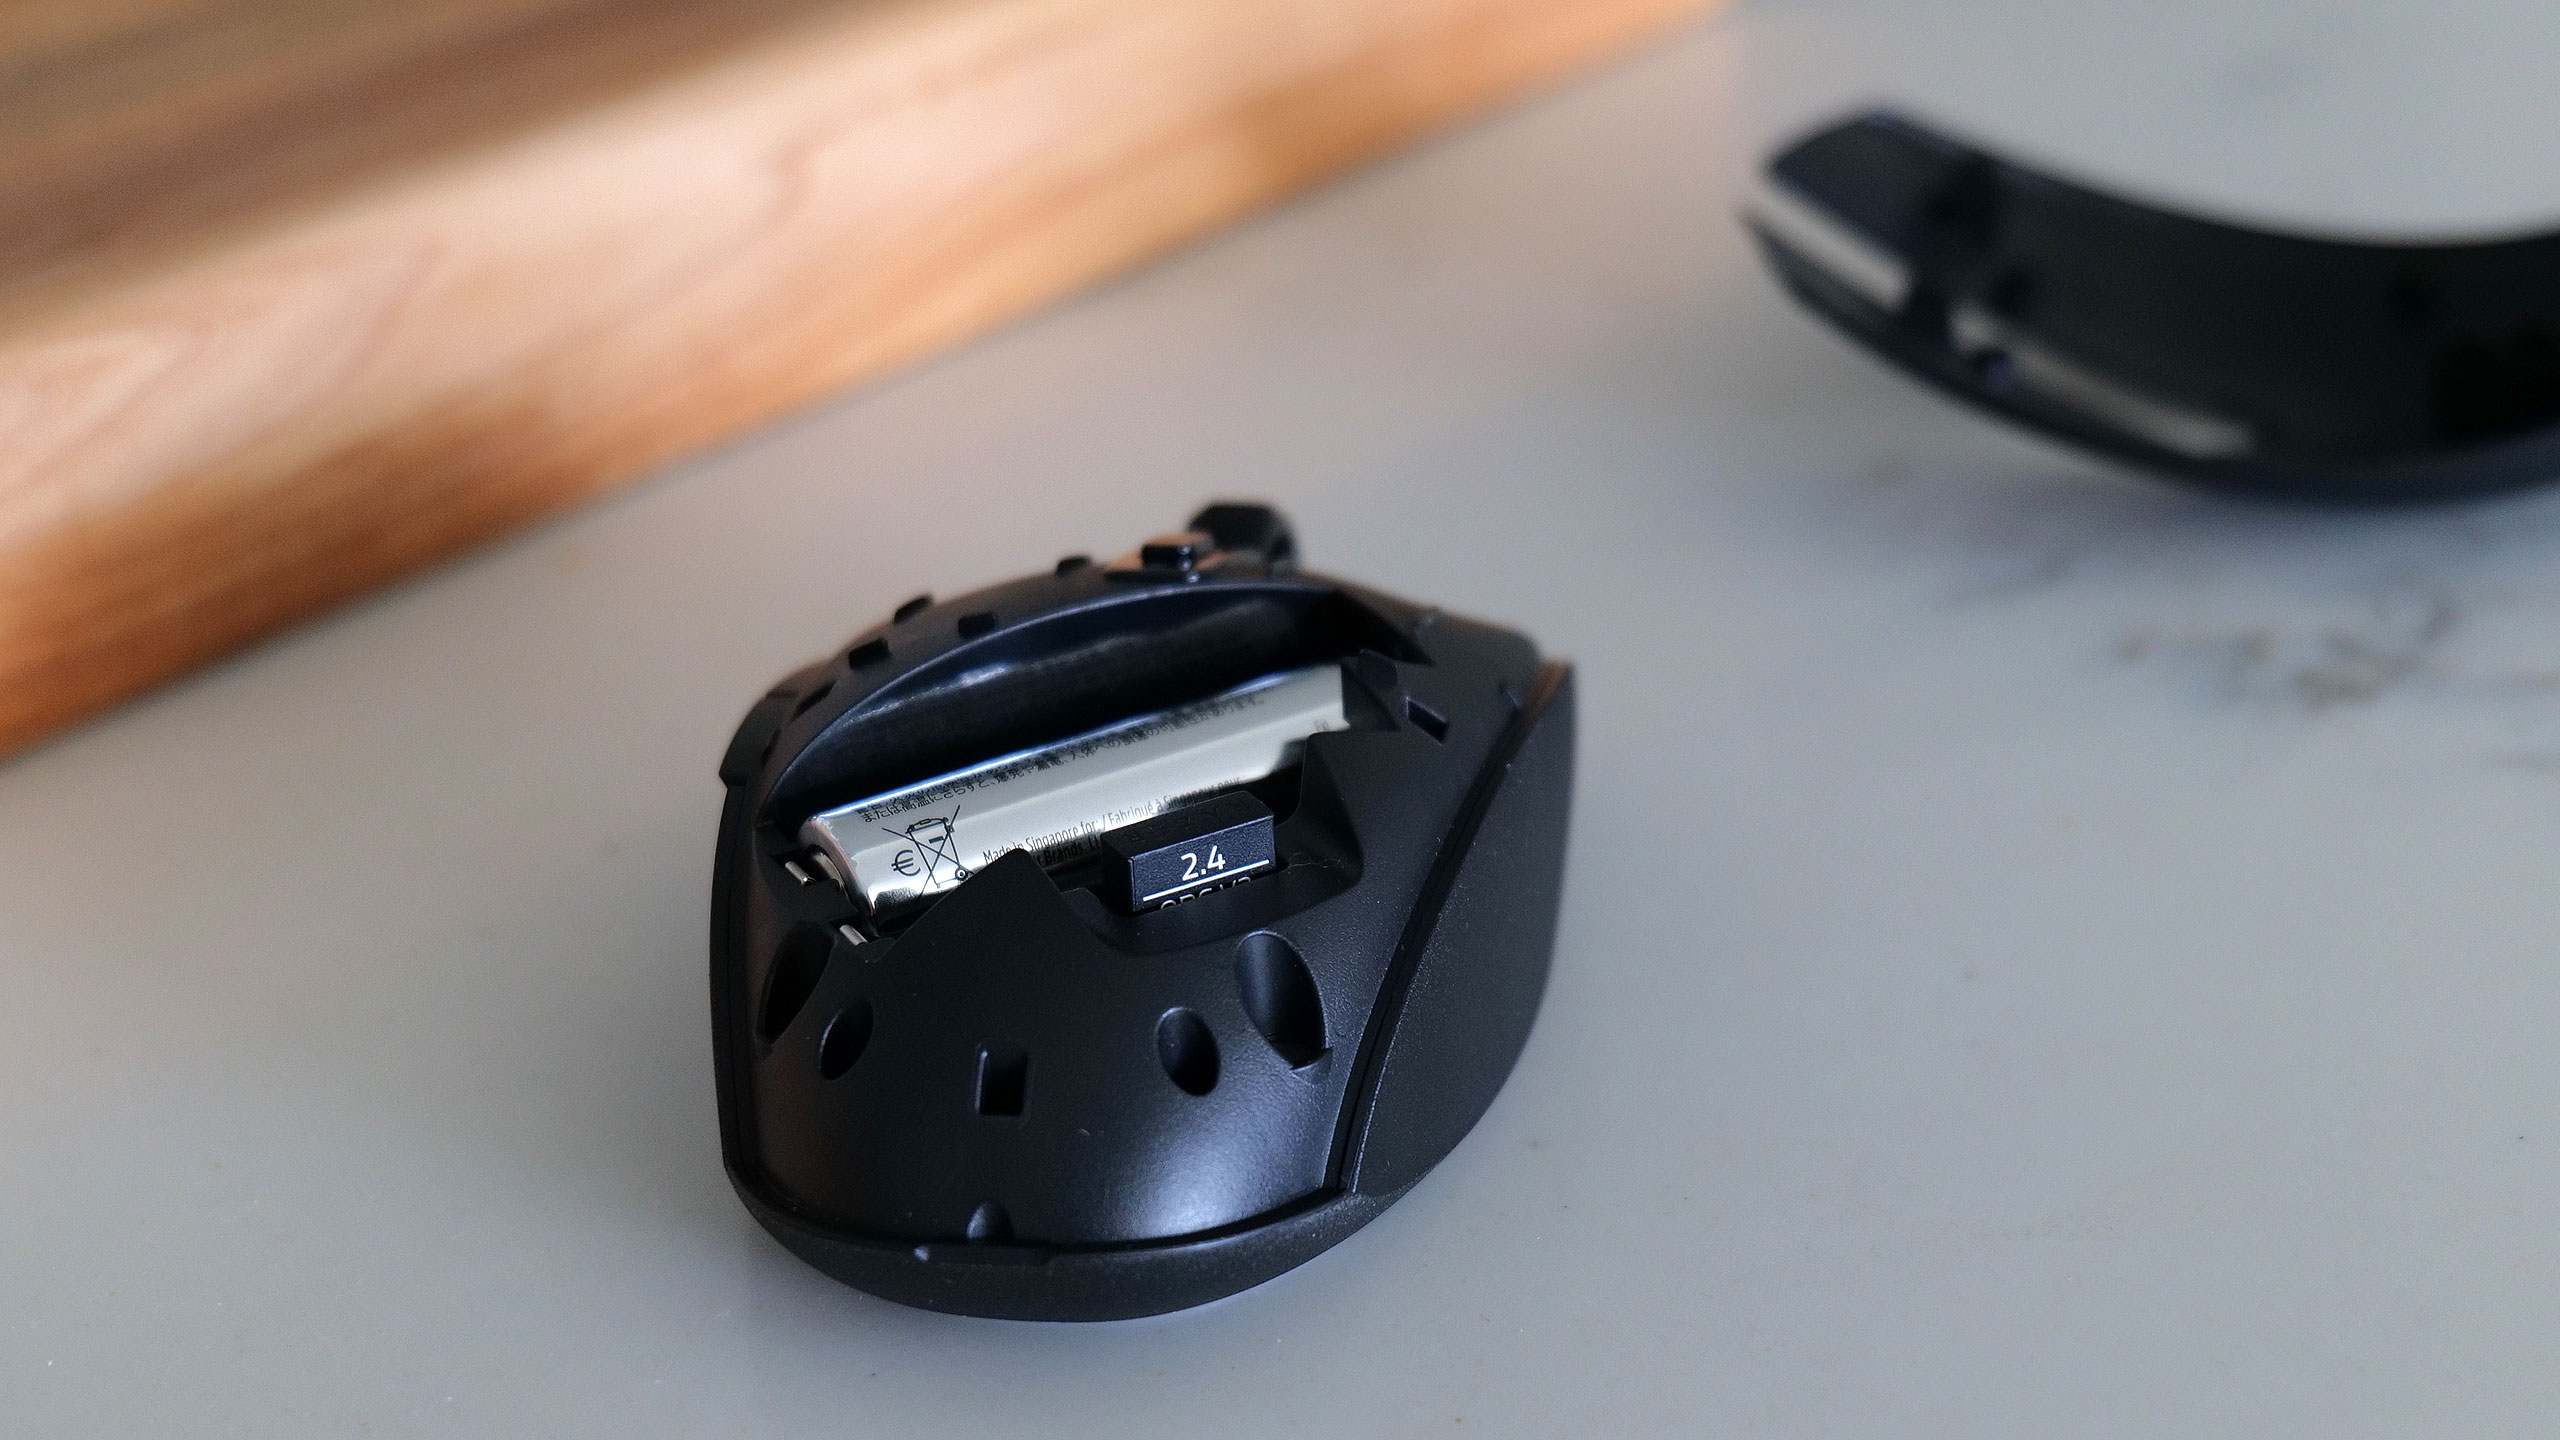 When it's not in use, you can store the Orochi's Hyperspeed Wireless dongle inside the mouse. Very handy.  (Photo: Sam Rutherford)